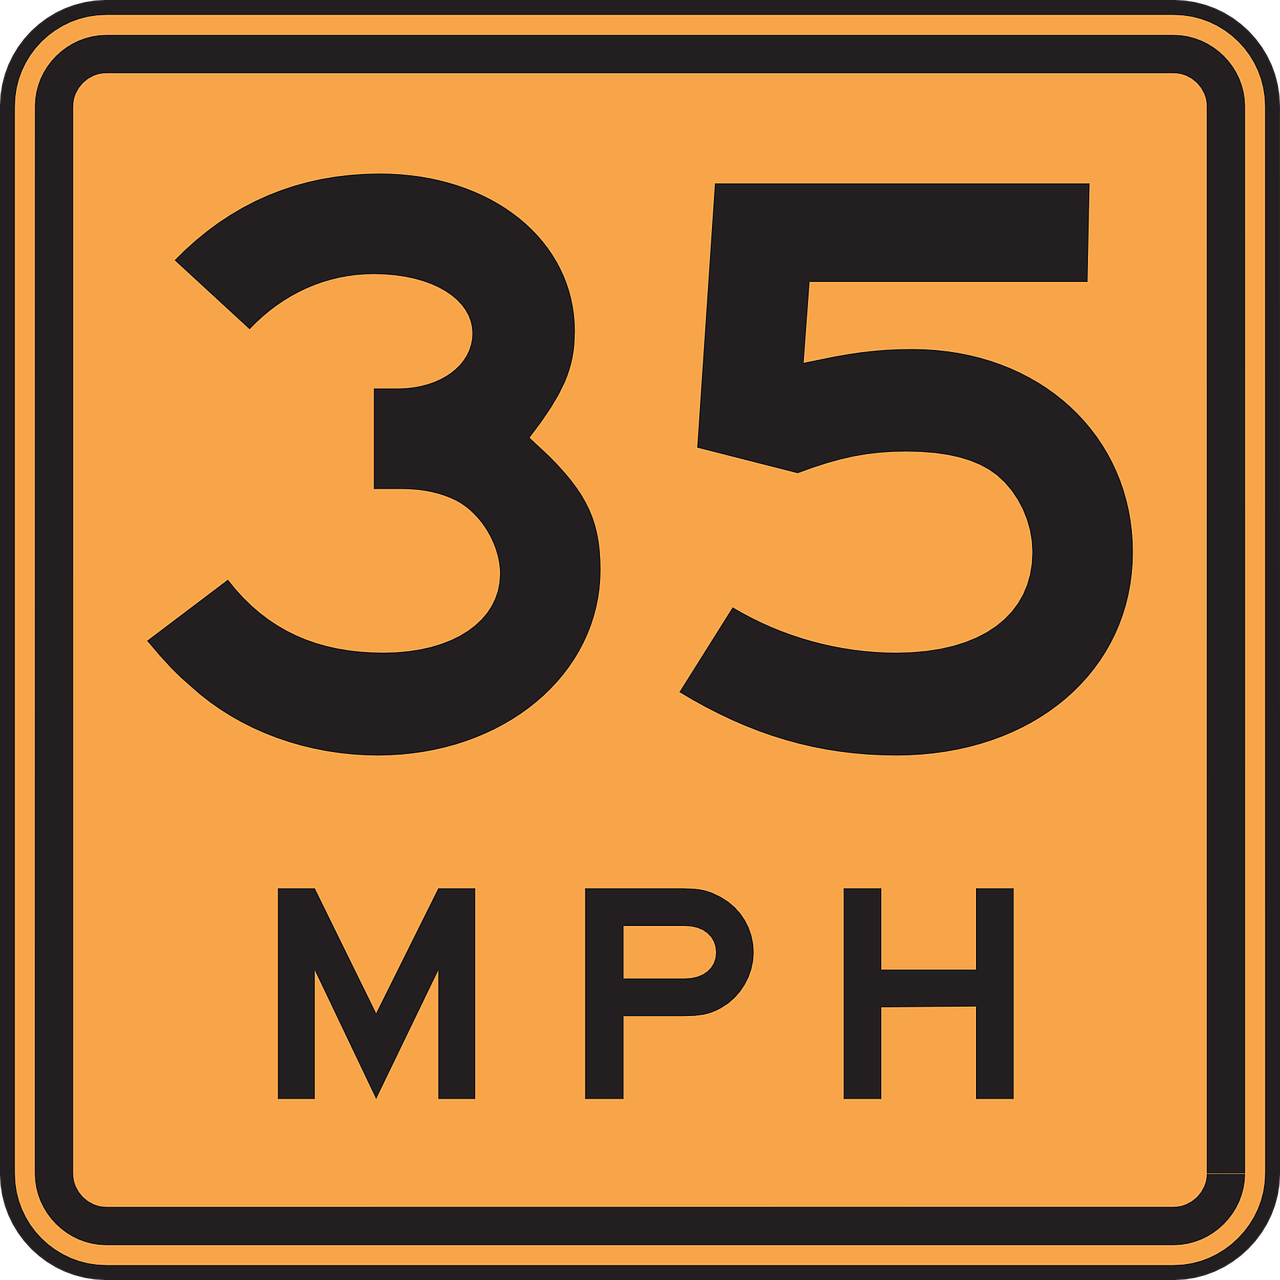 road,driving,speed,35,miles,per,hour,mph,drive,car,free vector graphics,free pictures, free photos, free images, royalty free, free illustrations, public domain